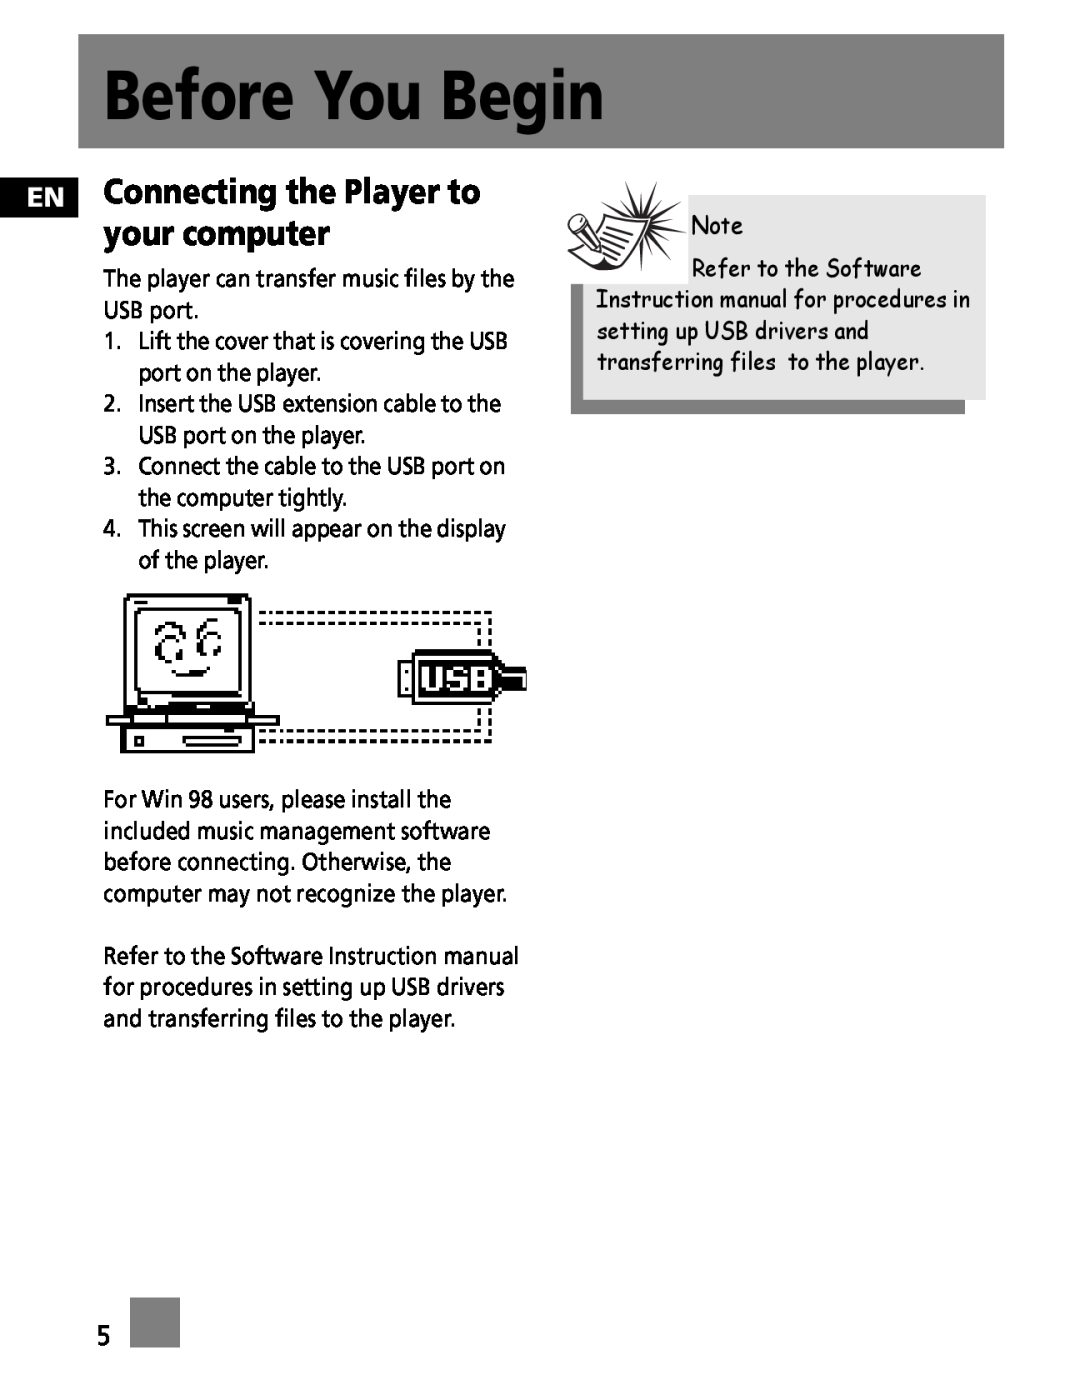 RCA M3000, M3001, MC3001, MC3000 user manual EN Connecting the Player to your computer, Before You Begin 